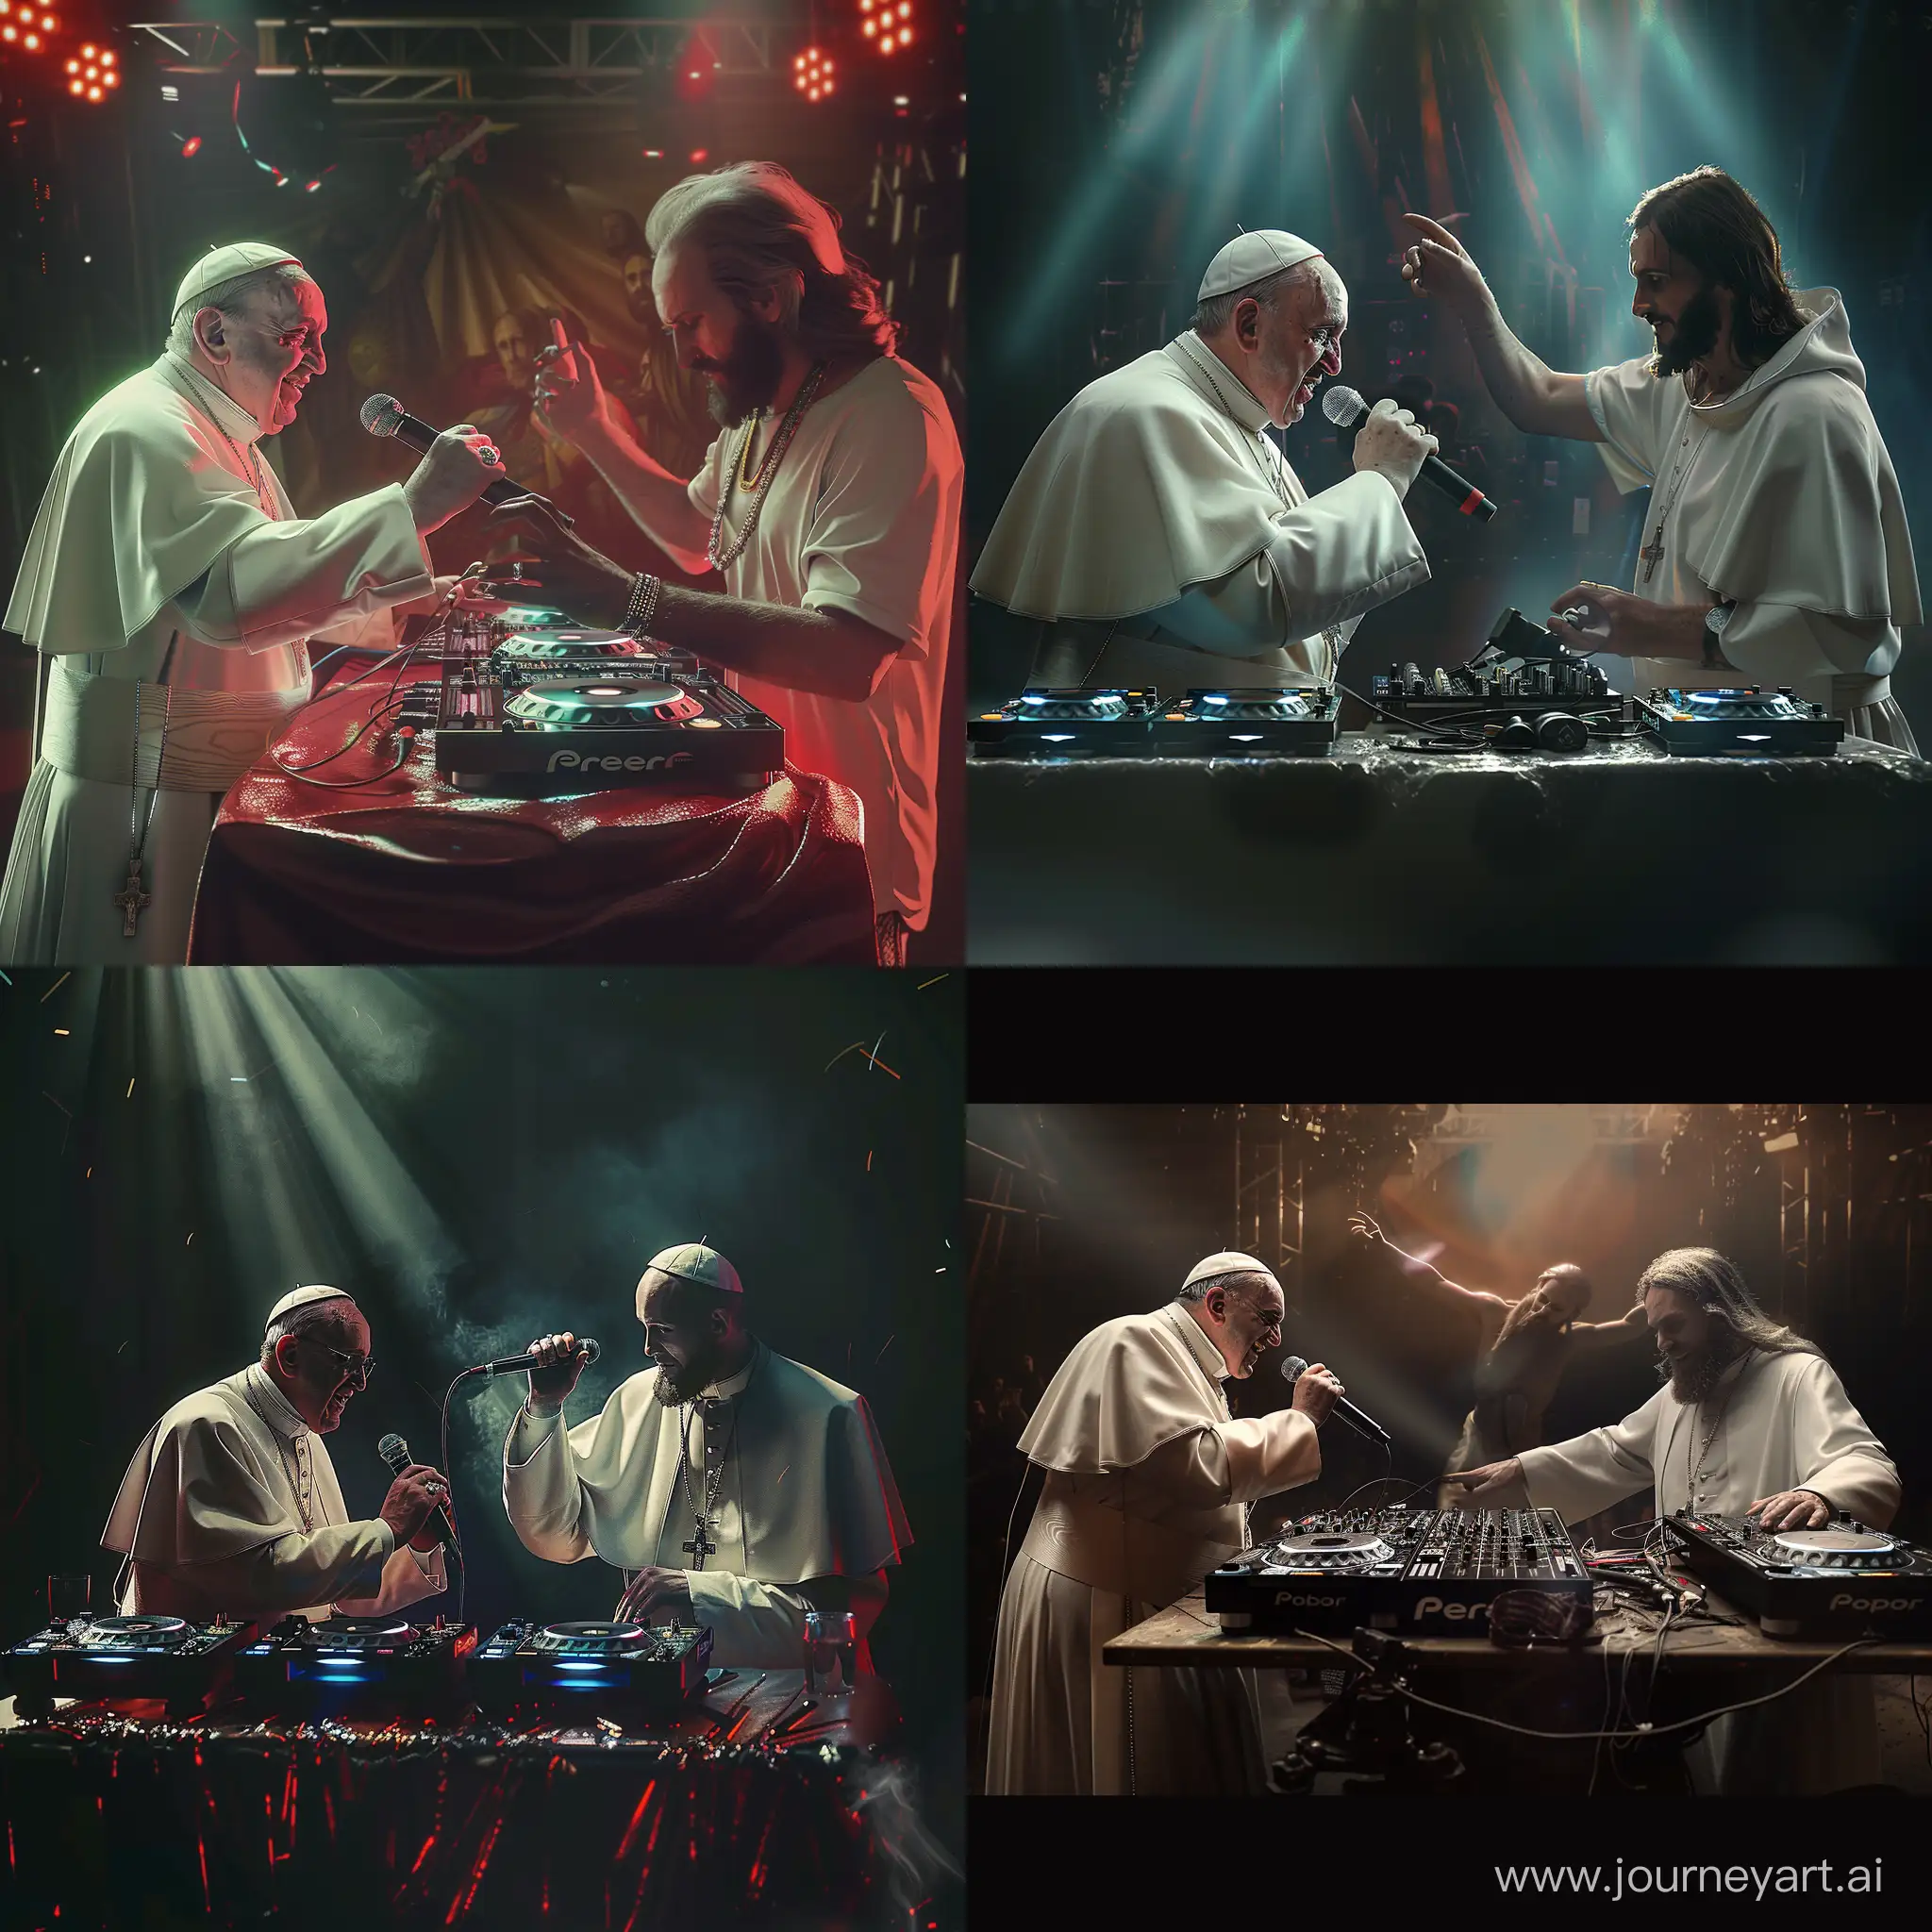 Pope-Francis-Rapping-with-Jesus-Christ-as-DJ-in-Hyperrealistic-8K-Cinematic-Concert